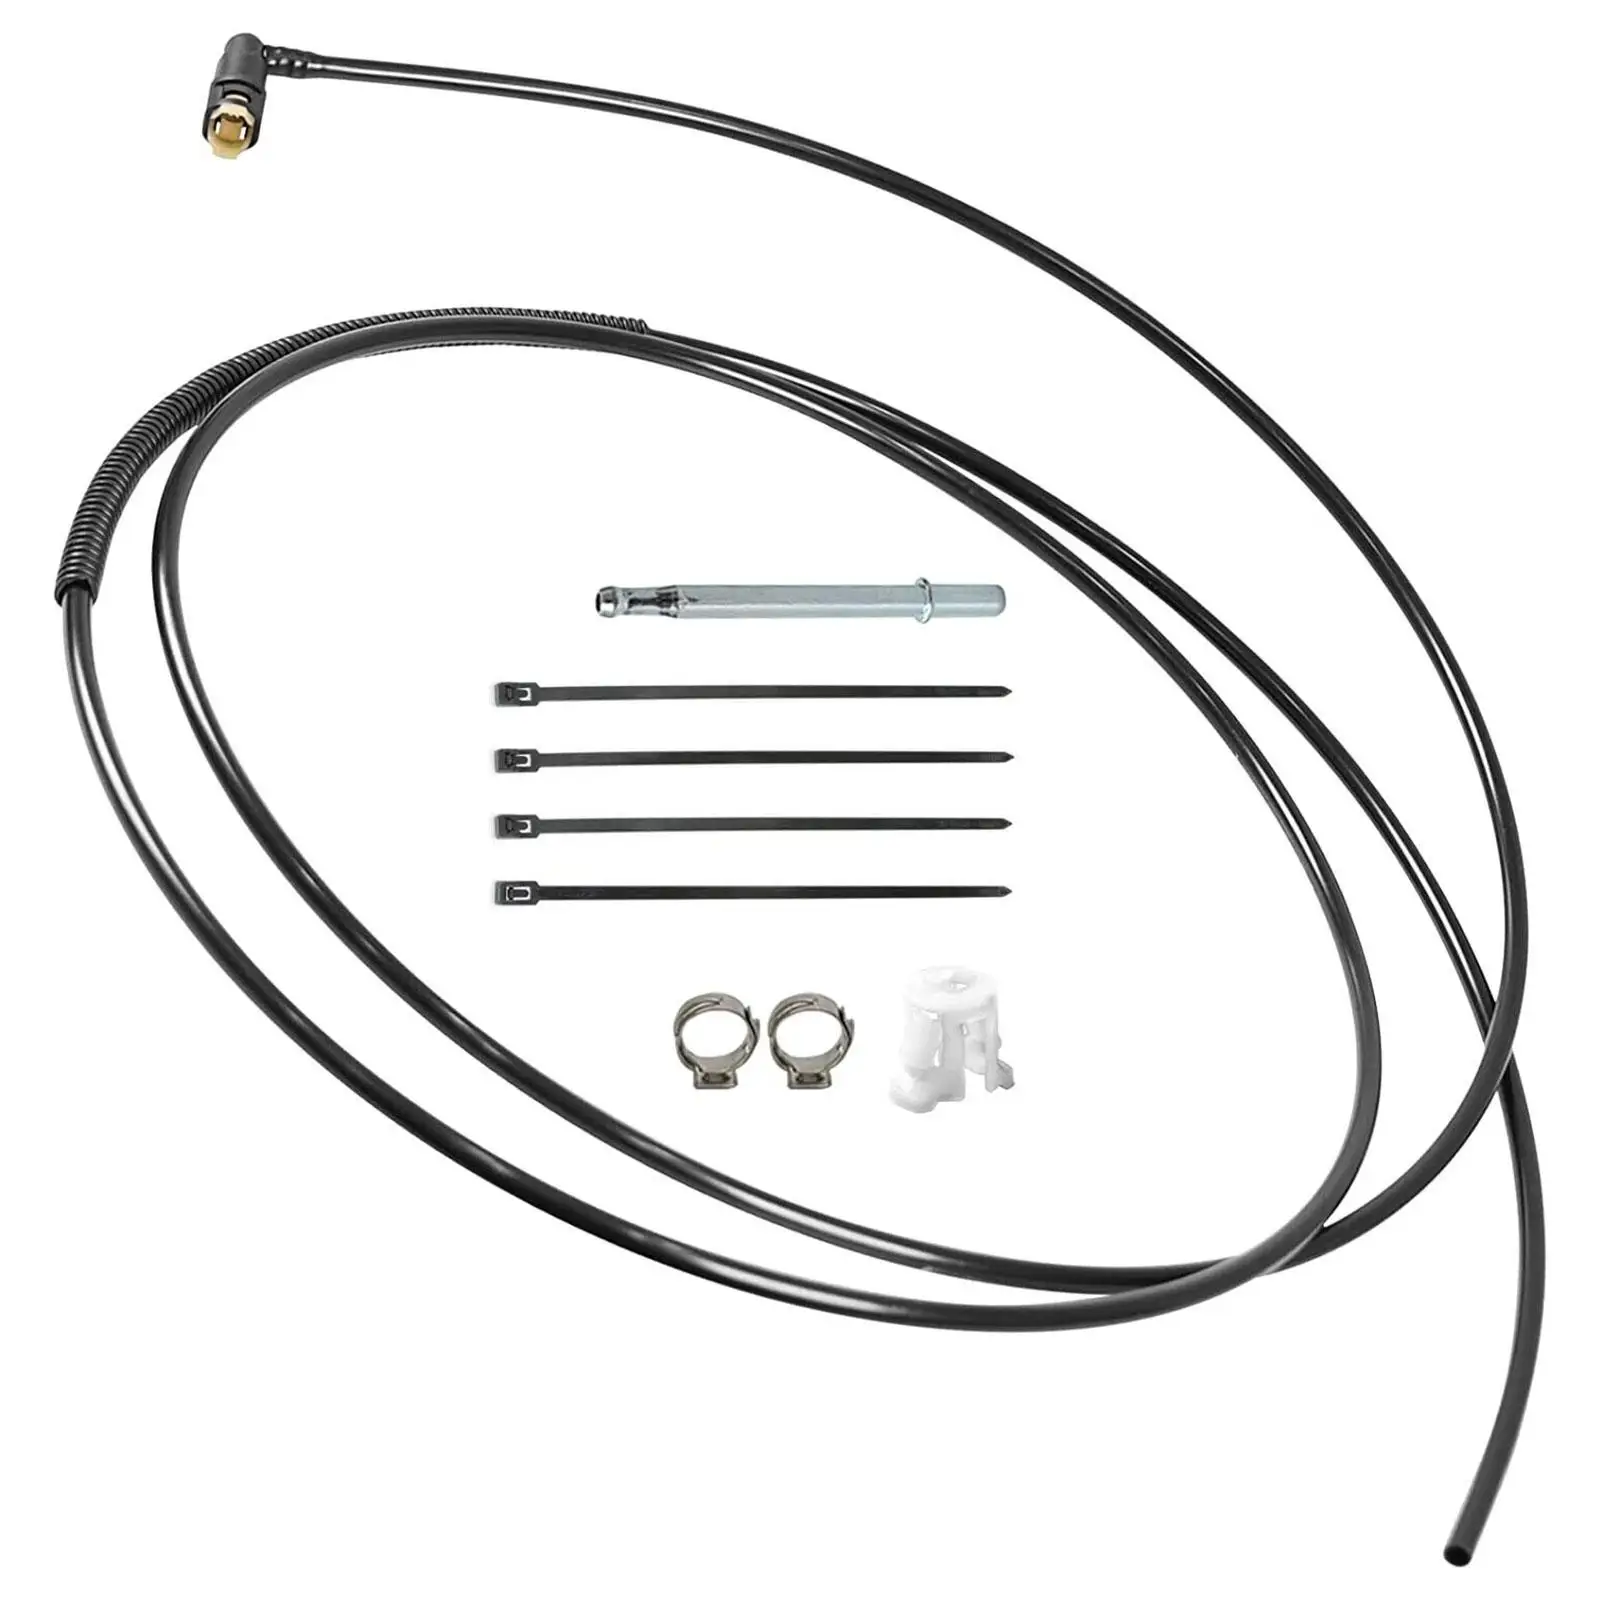 Gas Fuel Line Fl-Fg0212 Replacement Durable Spare Parts High Performance Premium for Dodge RAM Pick up 1500 2500 3500